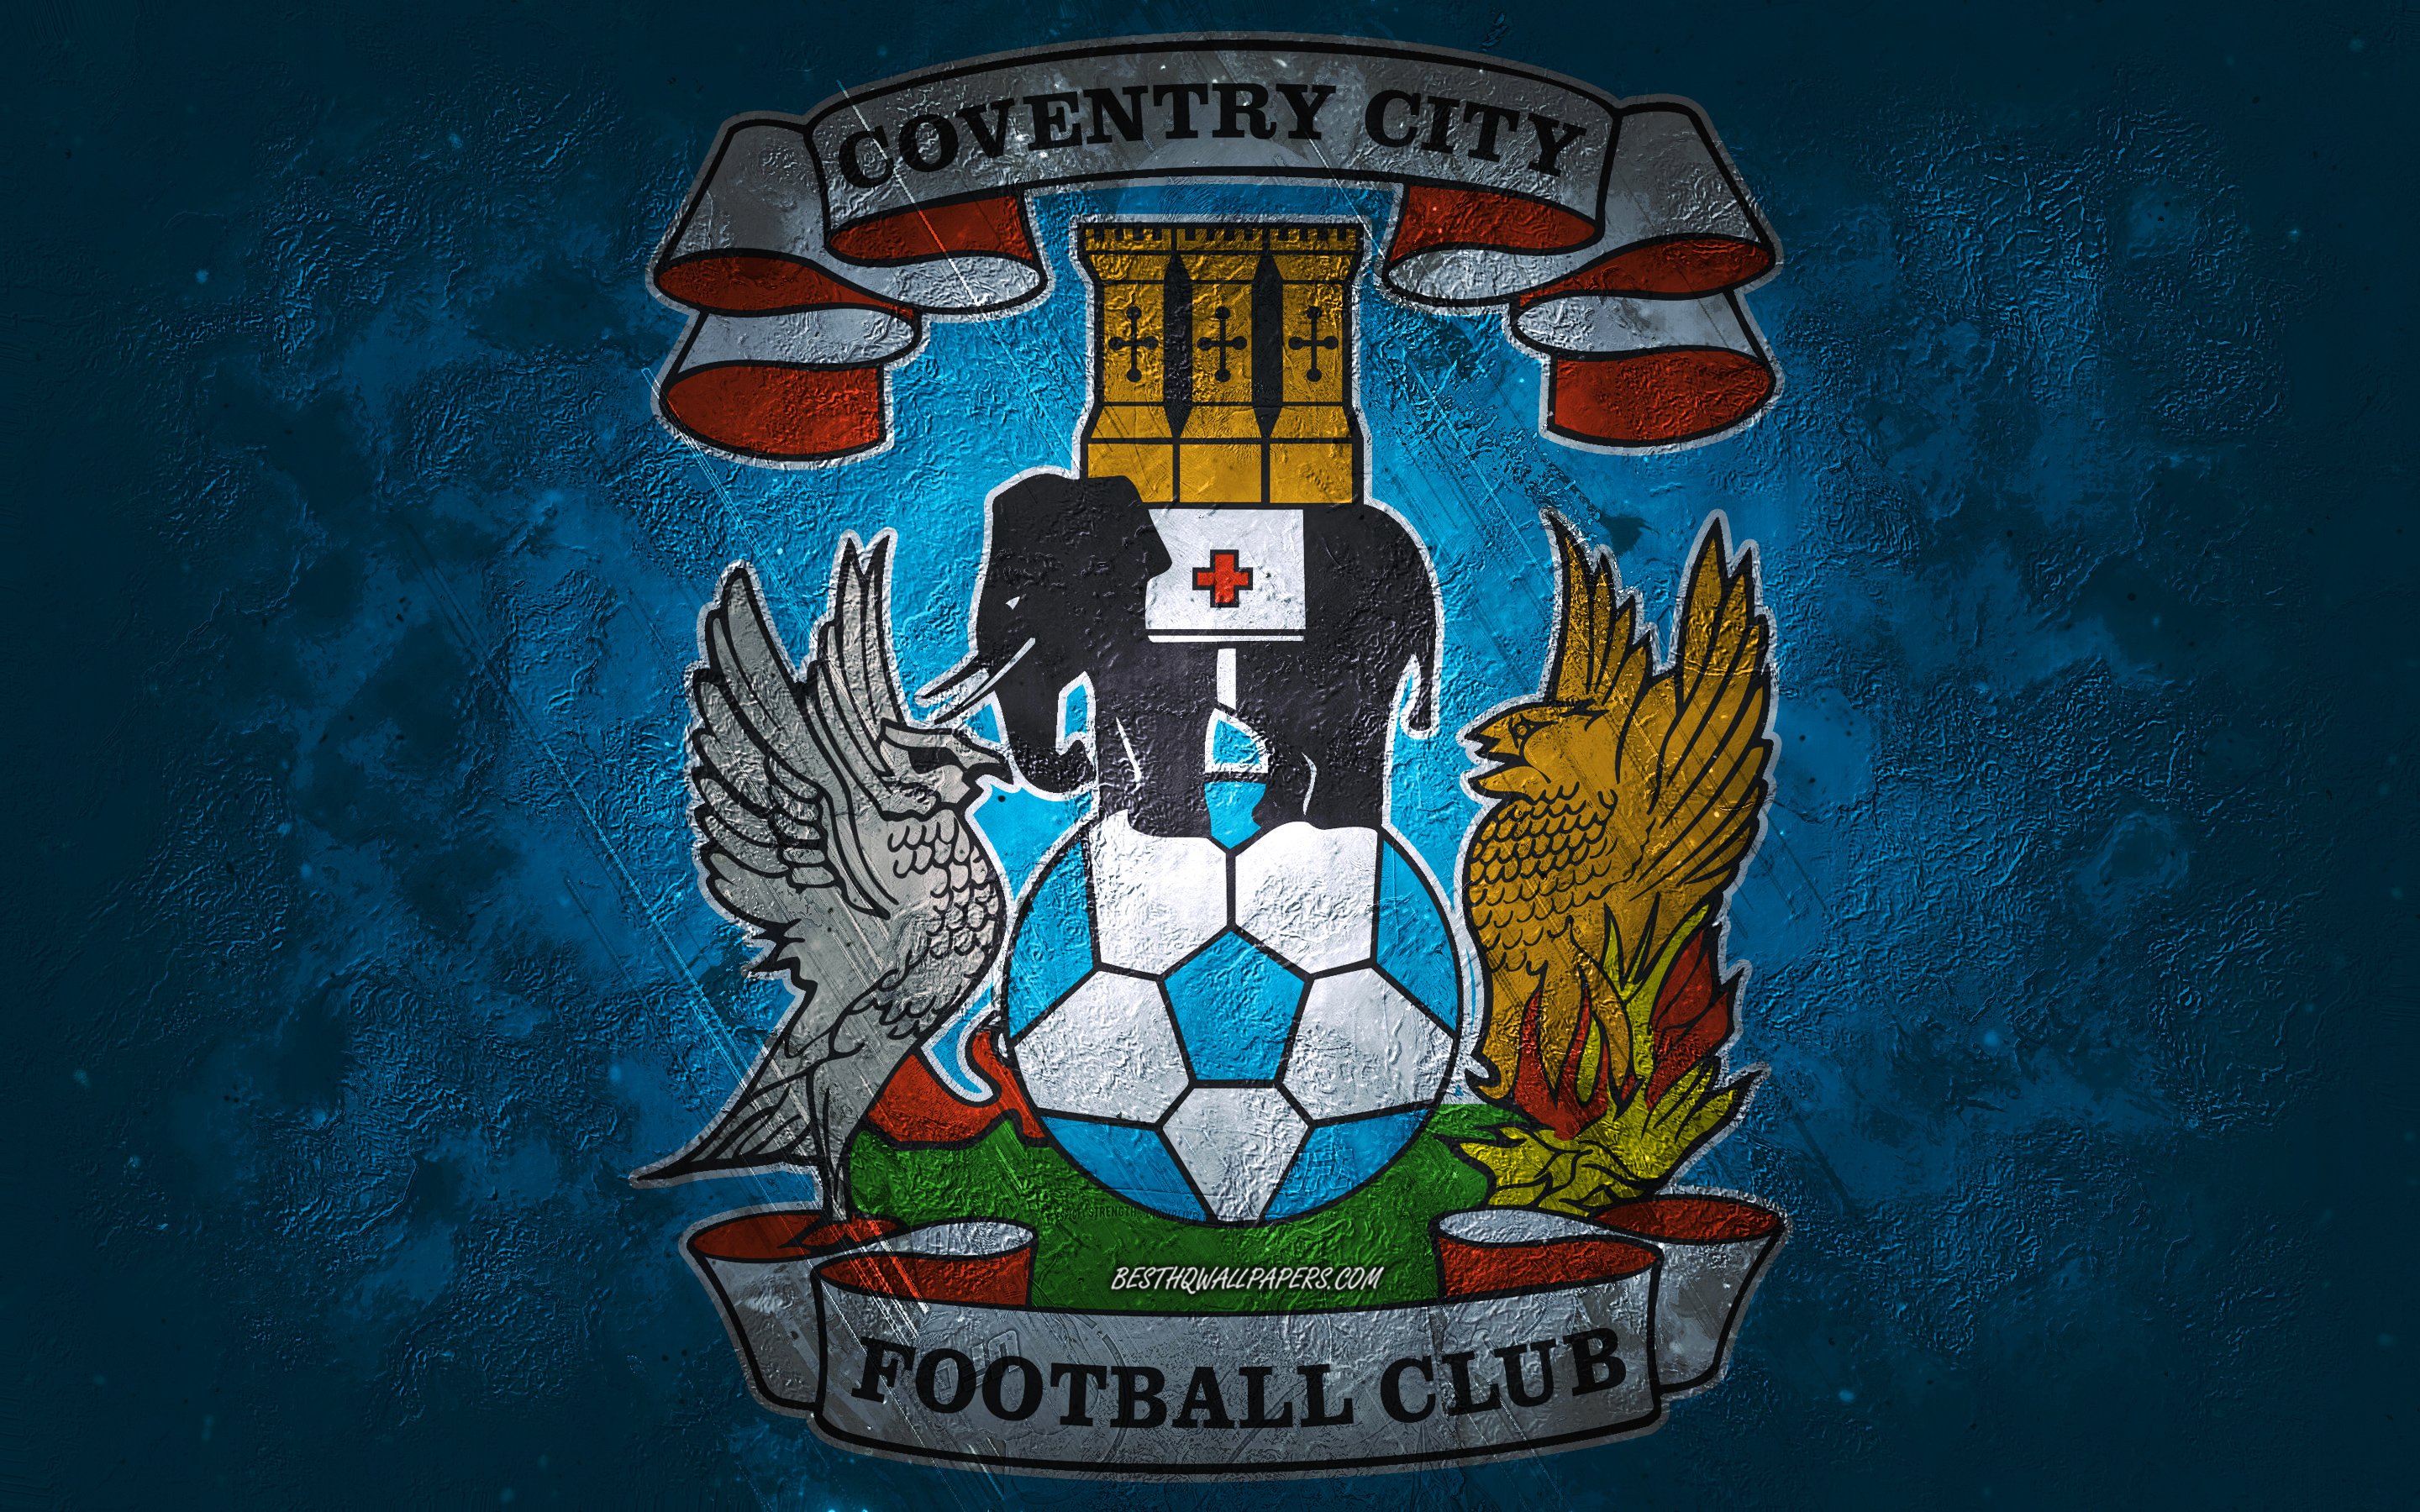 Download wallpaper Coventry City FC, English football team, blue background, Coventry City FC logo, grunge art, EFL Championship, Coventry, football, England, Coventry City FC emblem for desktop with resolution 2880x1800. High Quality